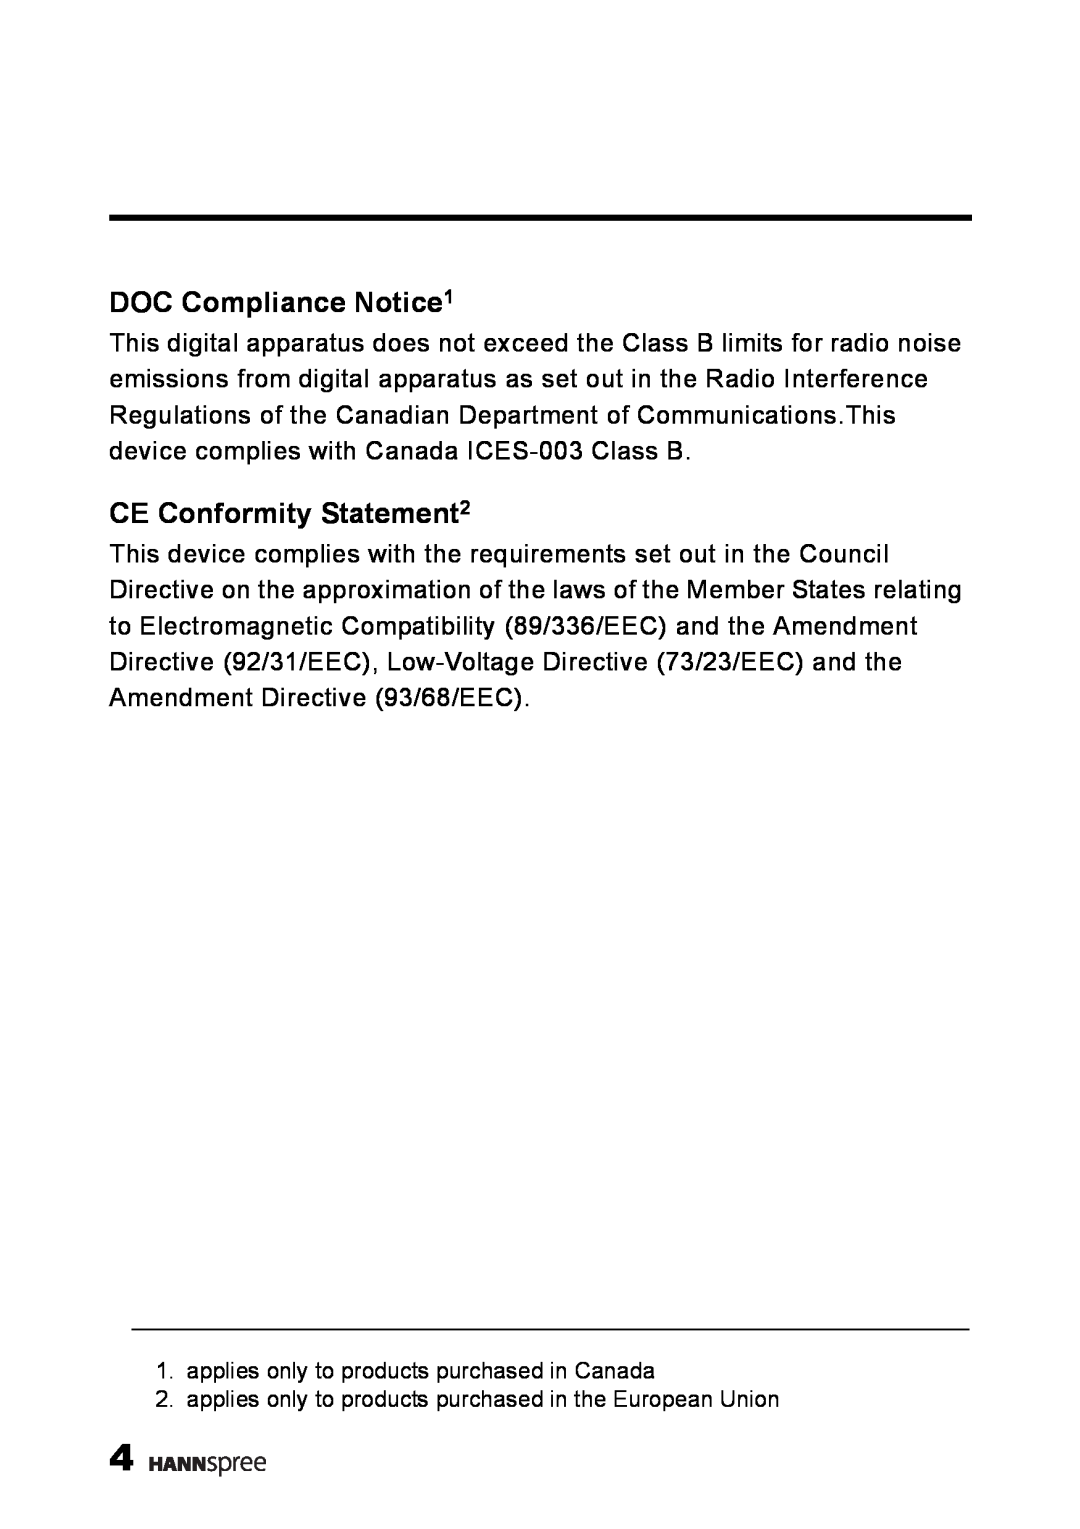 HANNspree MAK-000039 manual DOC Compliance Notice1, CE Conformity Statement2, applies only to products purchased in Canada 